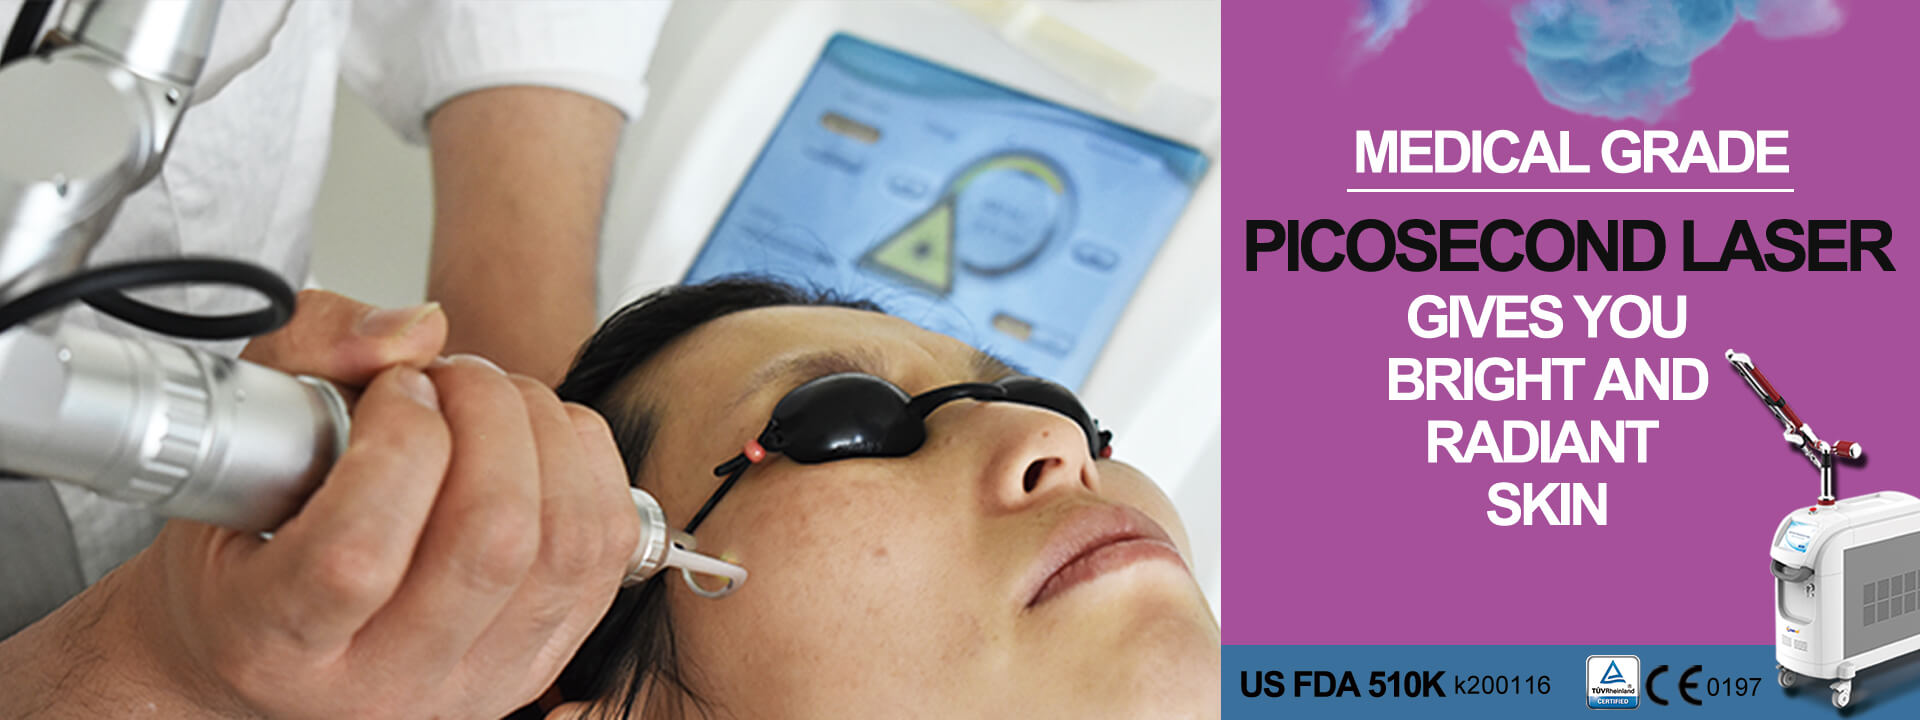 Shanghai Apolo Medical Technology, Ltd is a leading innovator and provider of Pico Nd:YAG, Switched ND YAG lasers, Co2 fractional lasers, and Diode Laser Body Sculpting. 